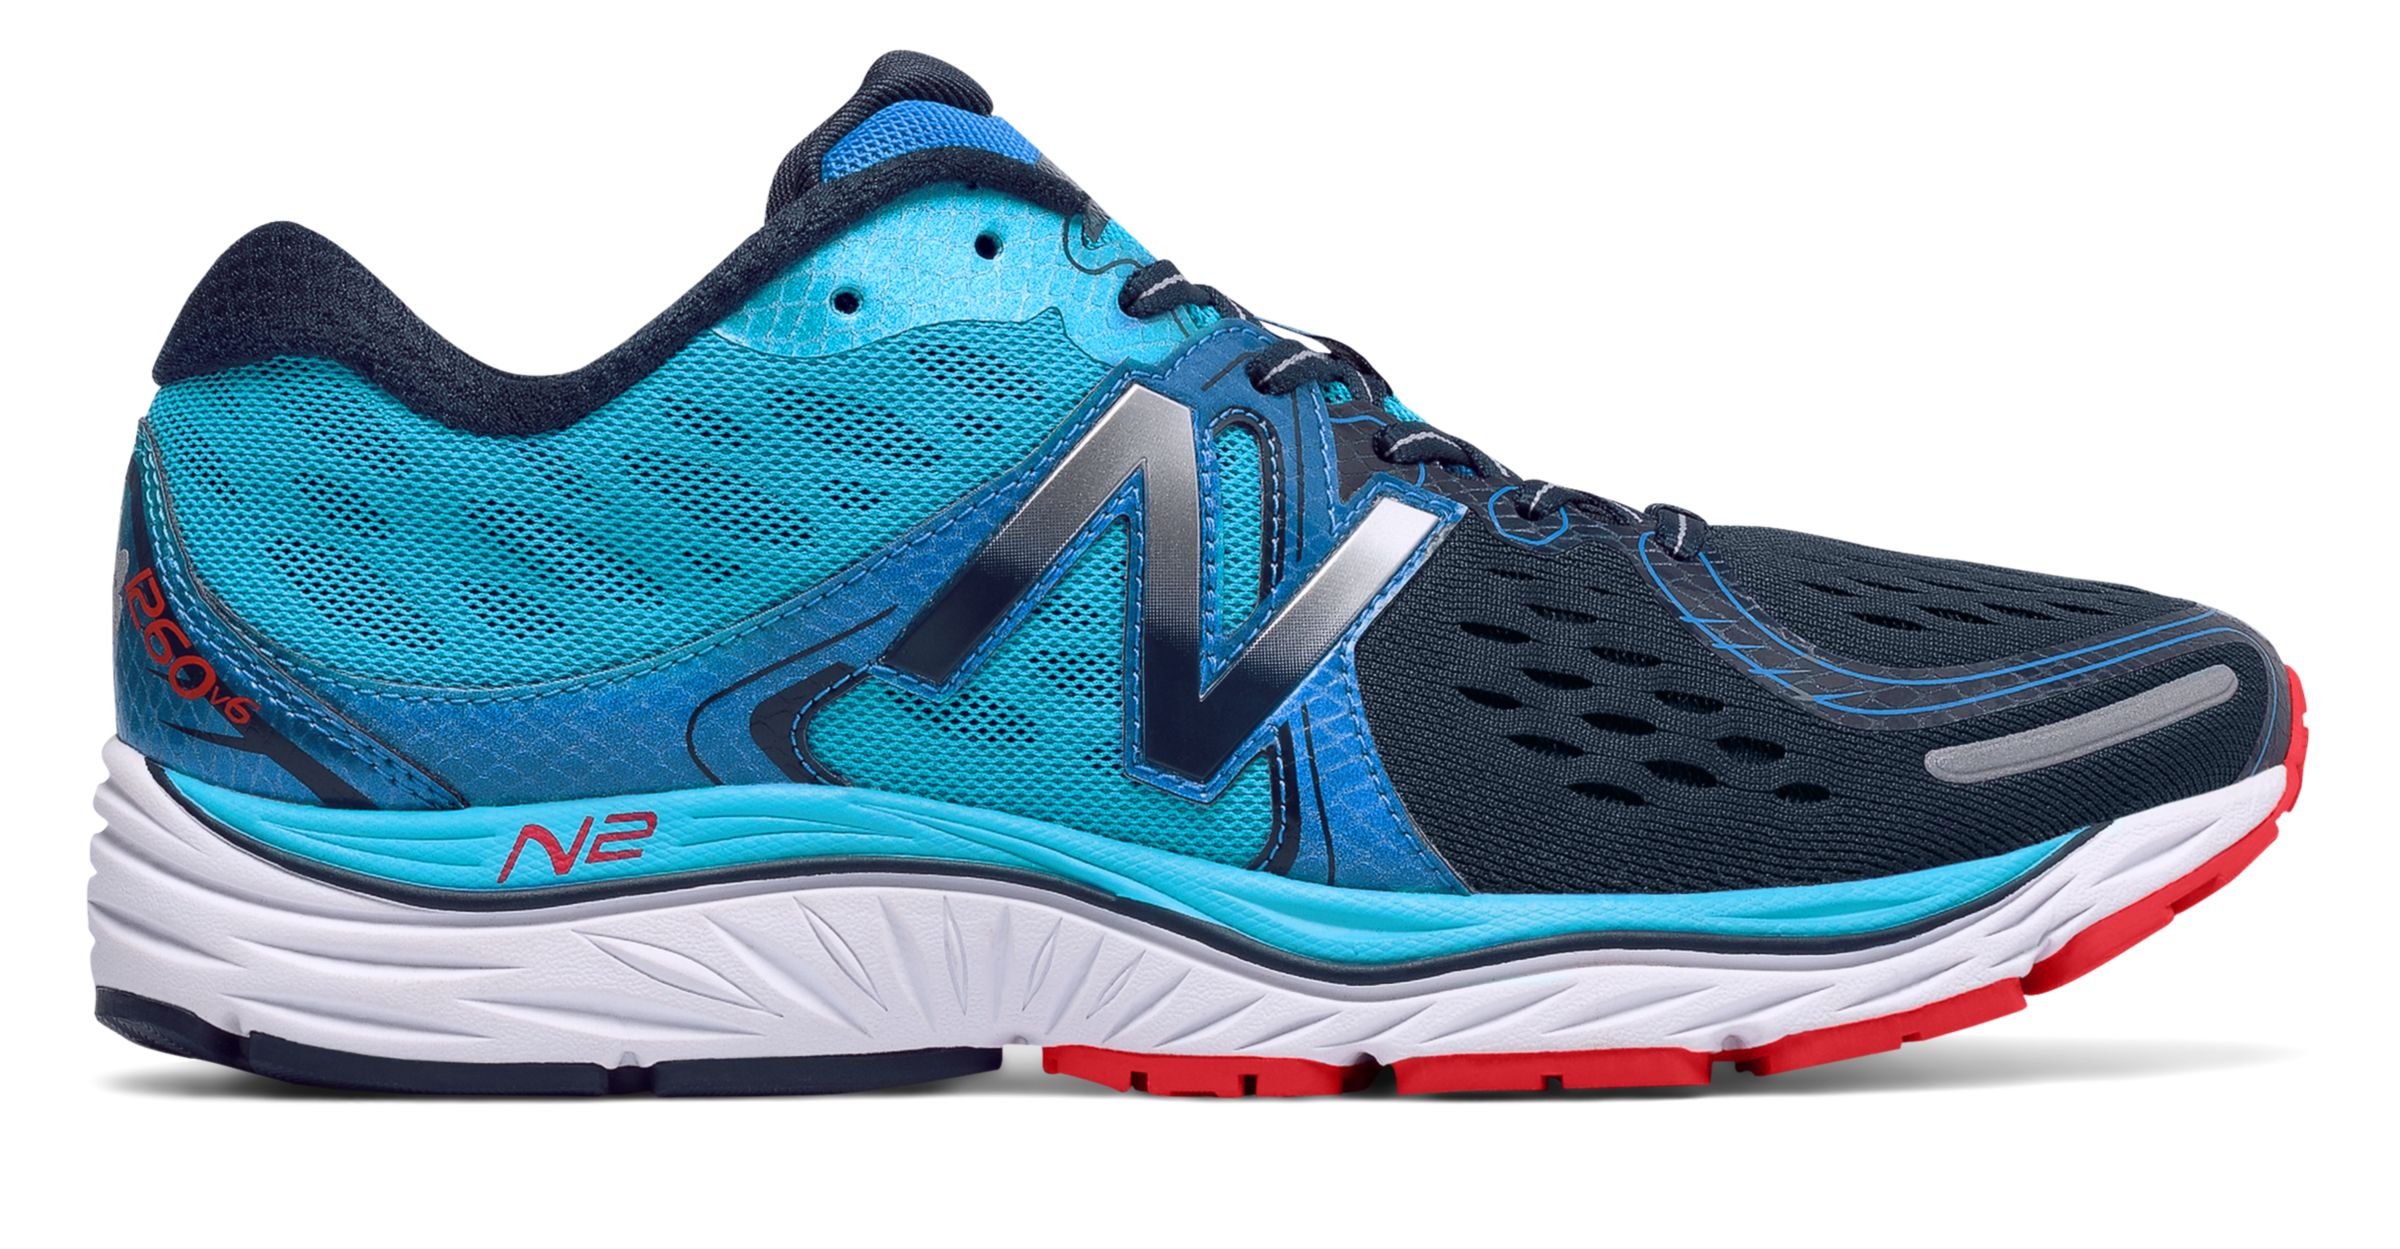 7 new balance 1260v6 stability shoes